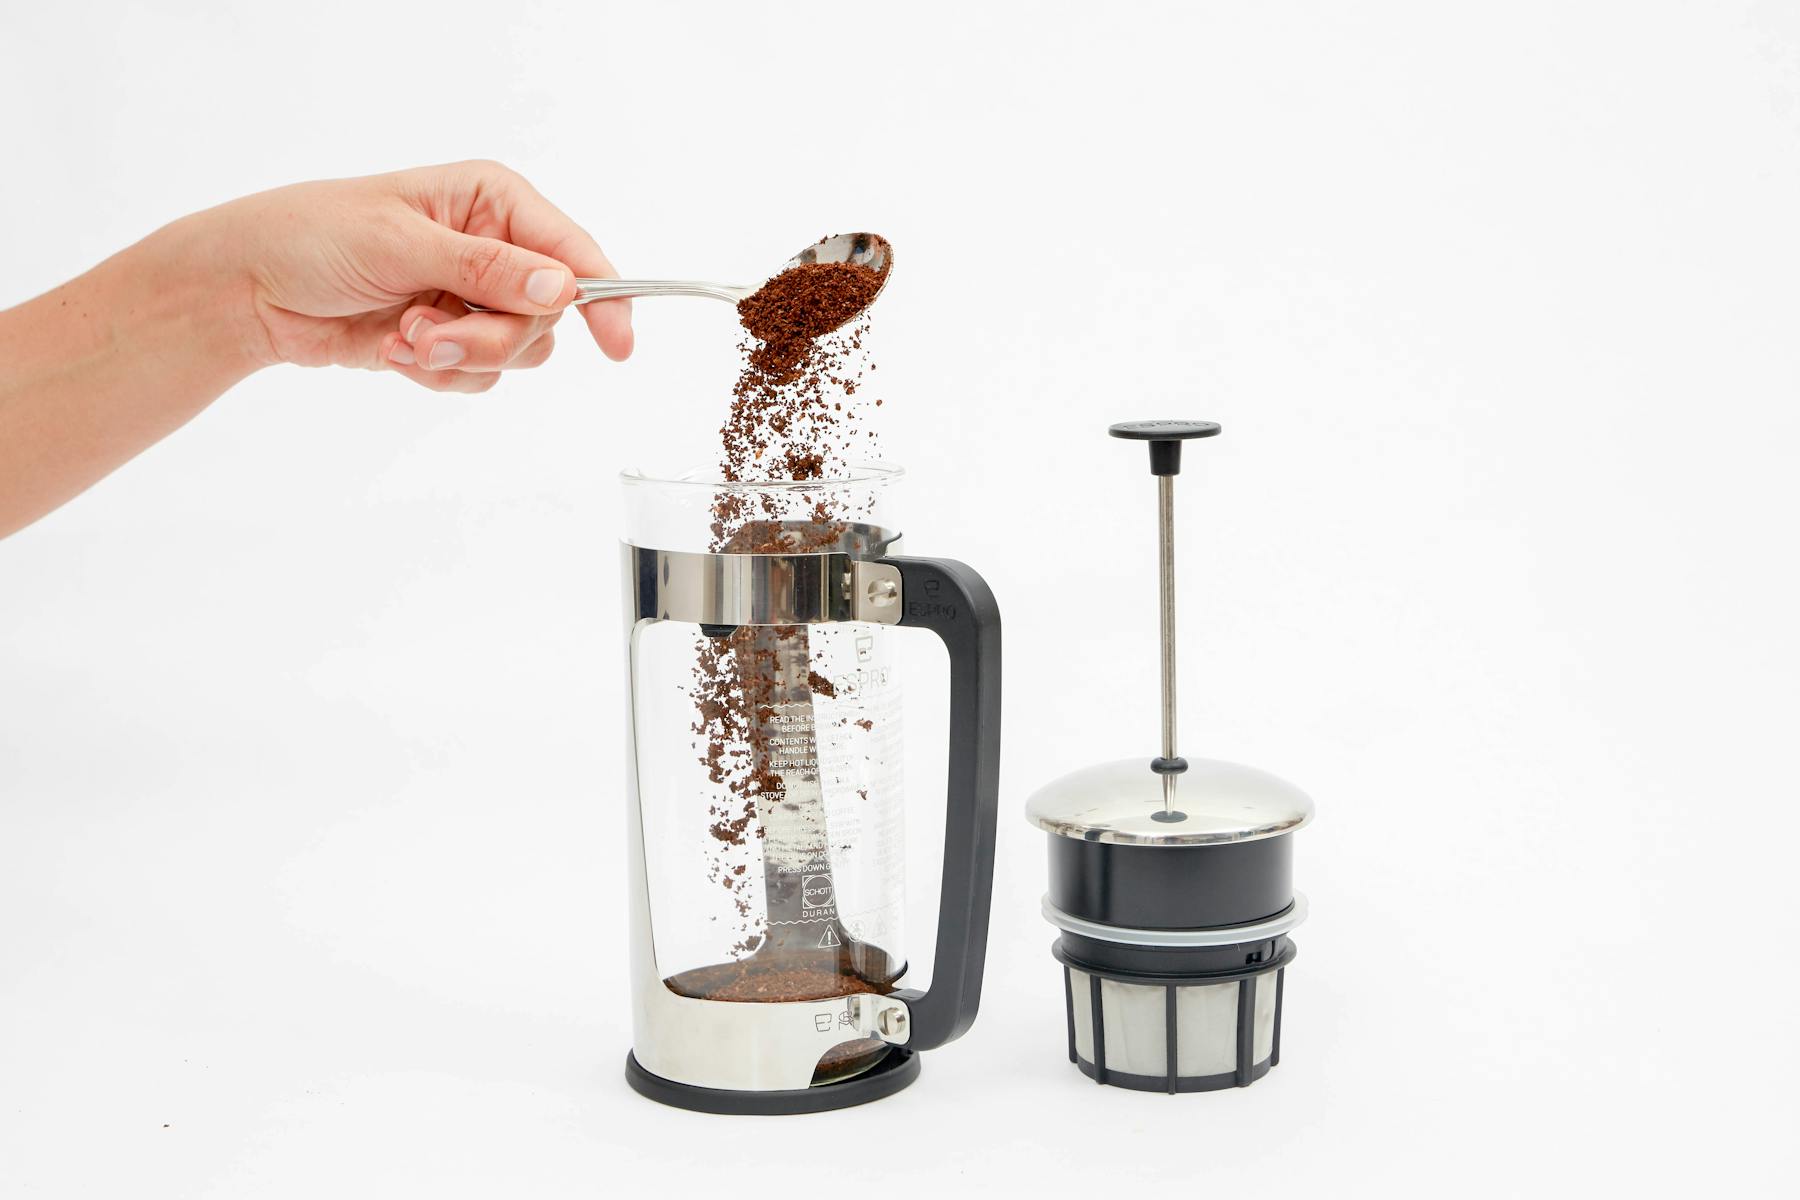 Place ground coffee in French Press